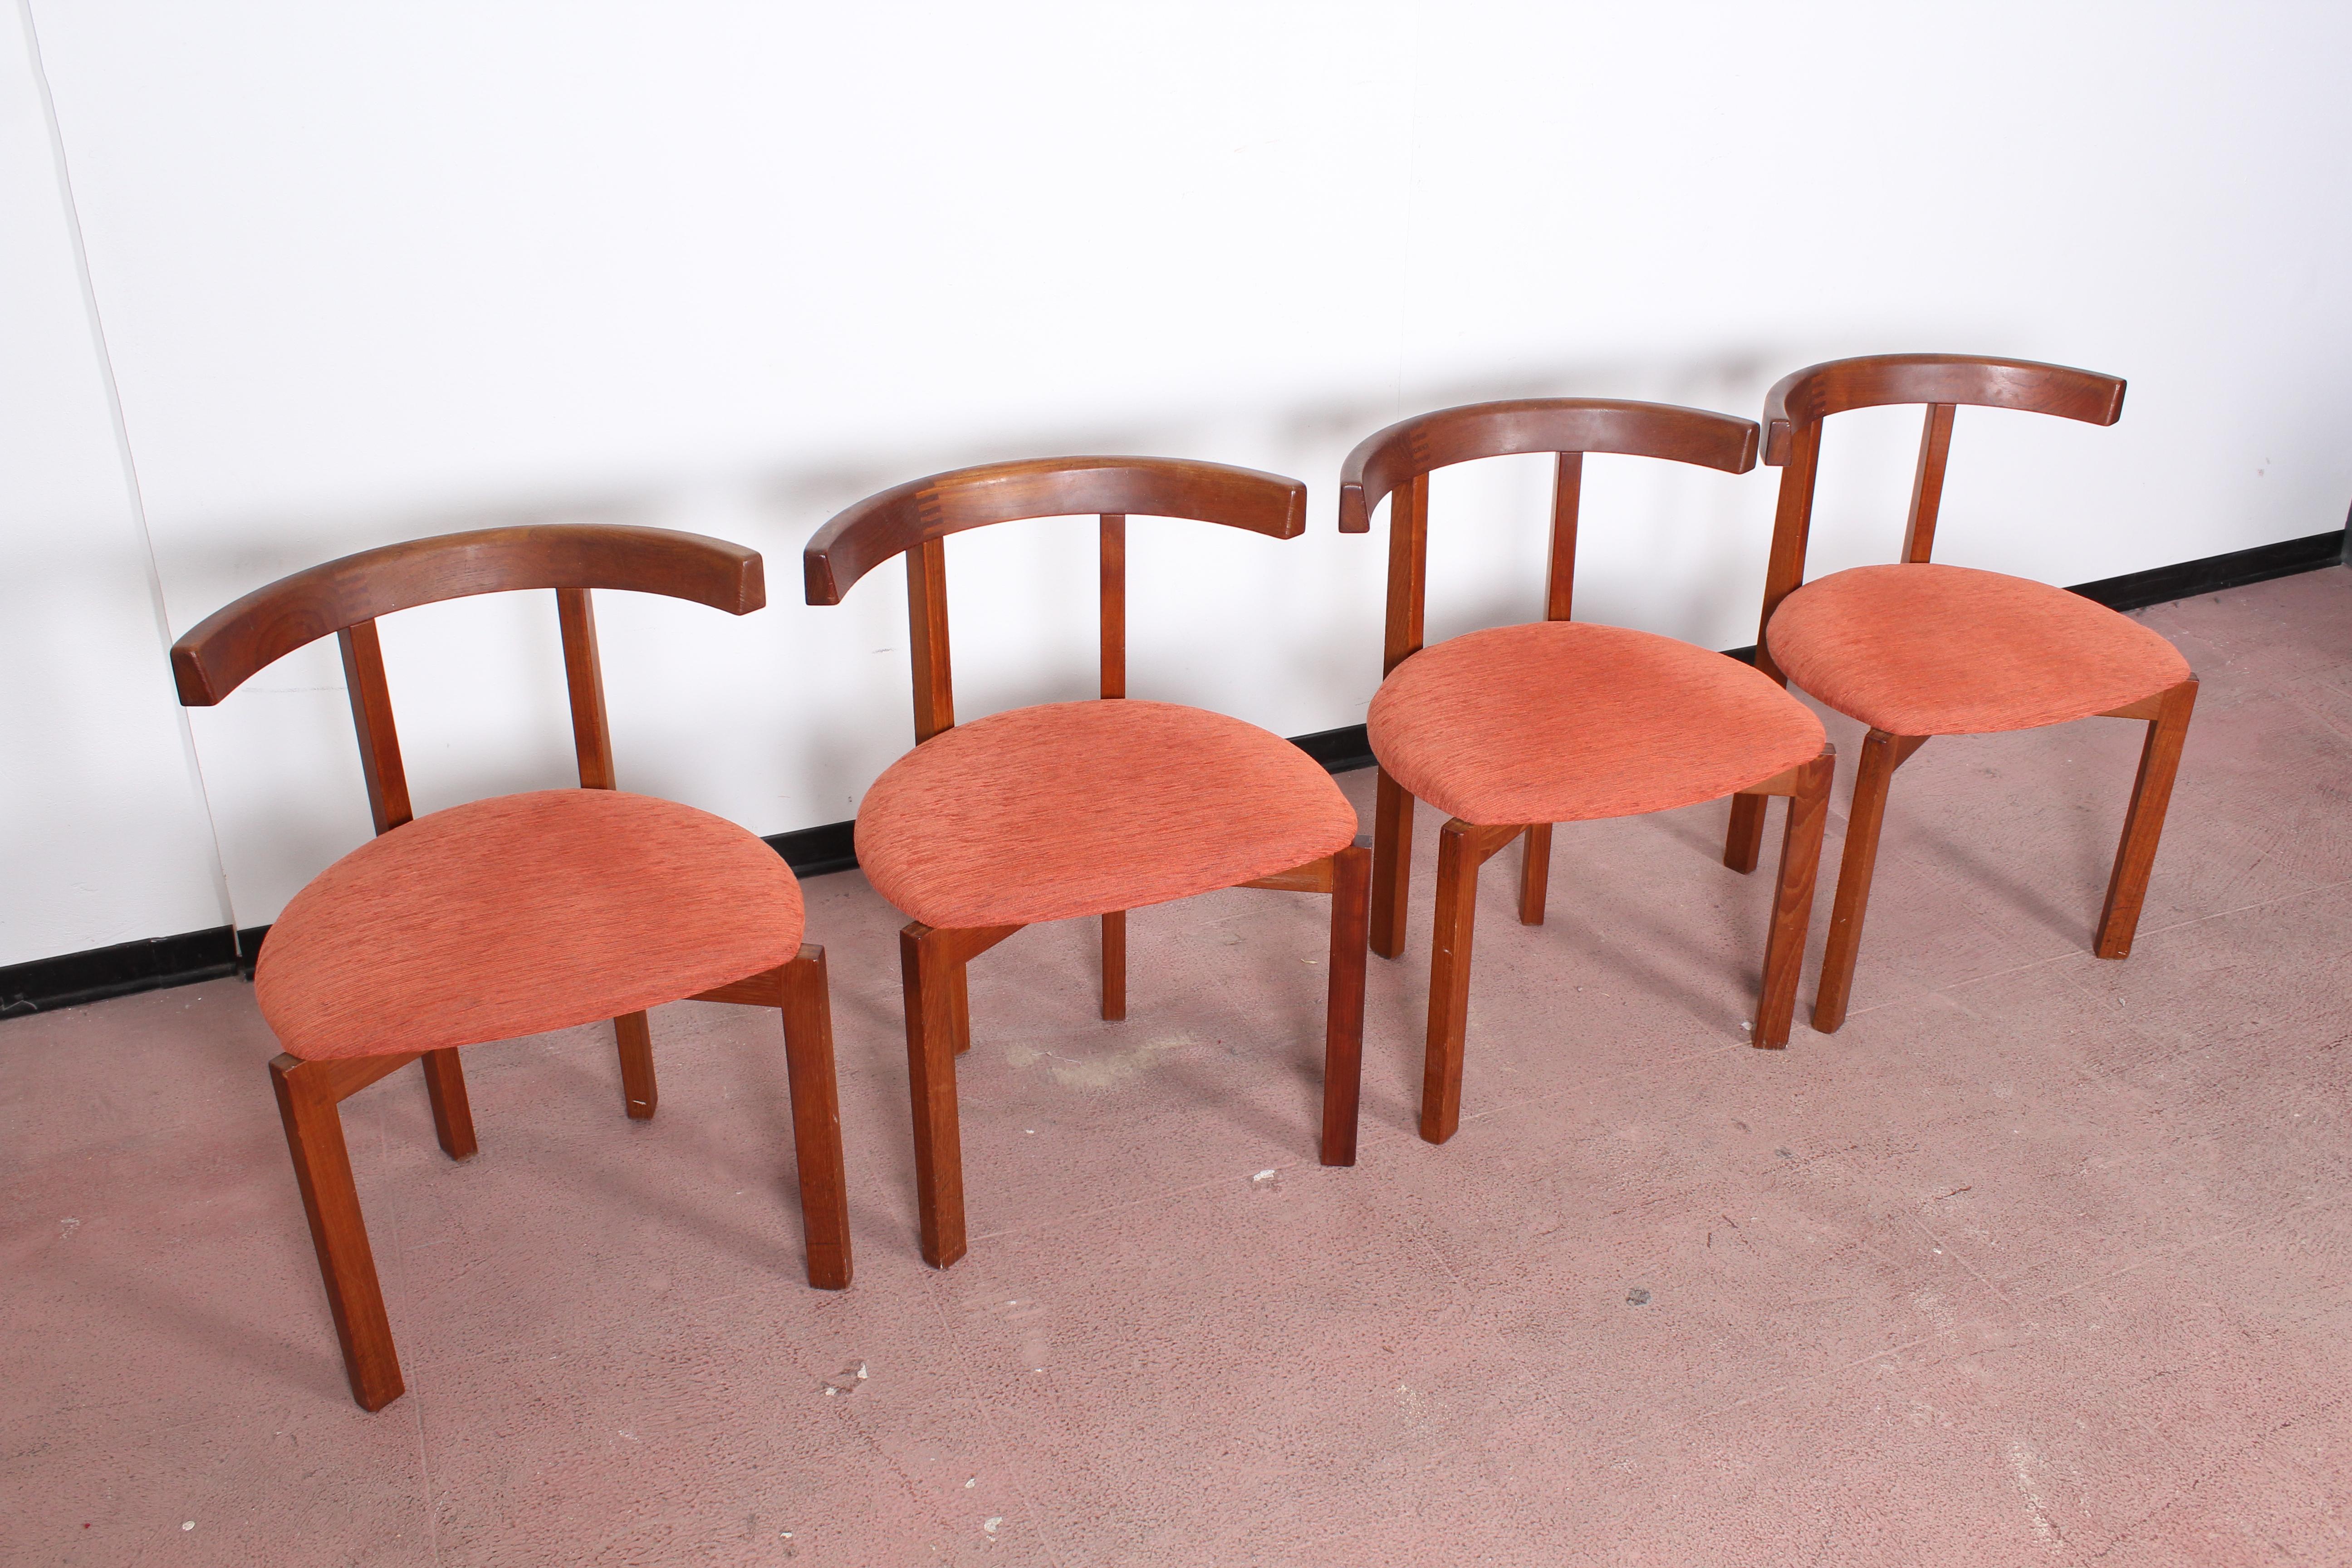 Set of four lovely wooden teak chairs with red fabric cover, produced in Denmark by FF Caffrance, printed and labeled, circa 1960.
Measures: Height 70 cm, seat width 50 cm, seat depth 45 cm, seat height 43 cm.
Wear consistent with age and use.